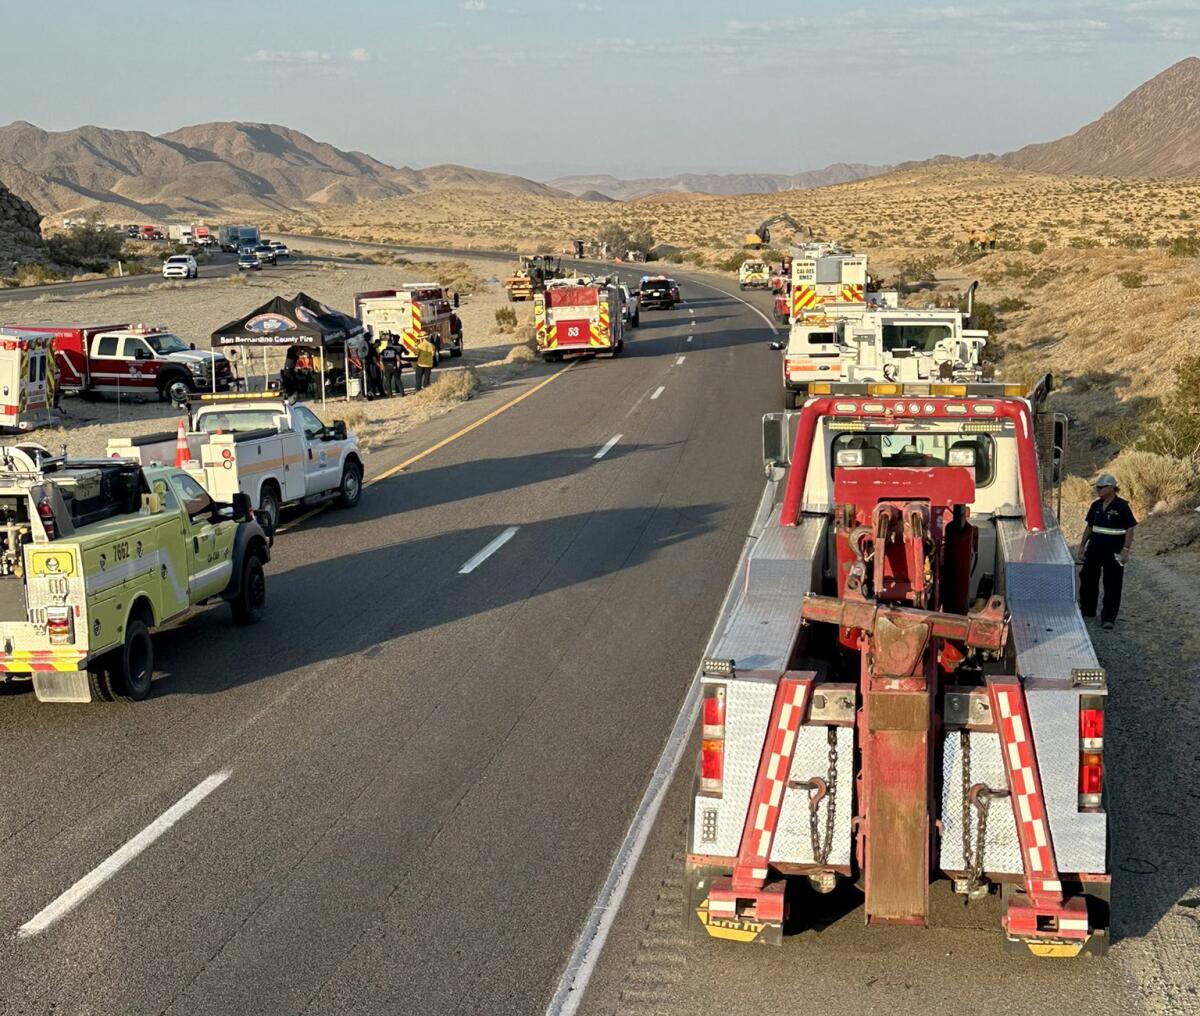 Emergency vehicles cast long shadows while parked on the shoulders of a desert highway